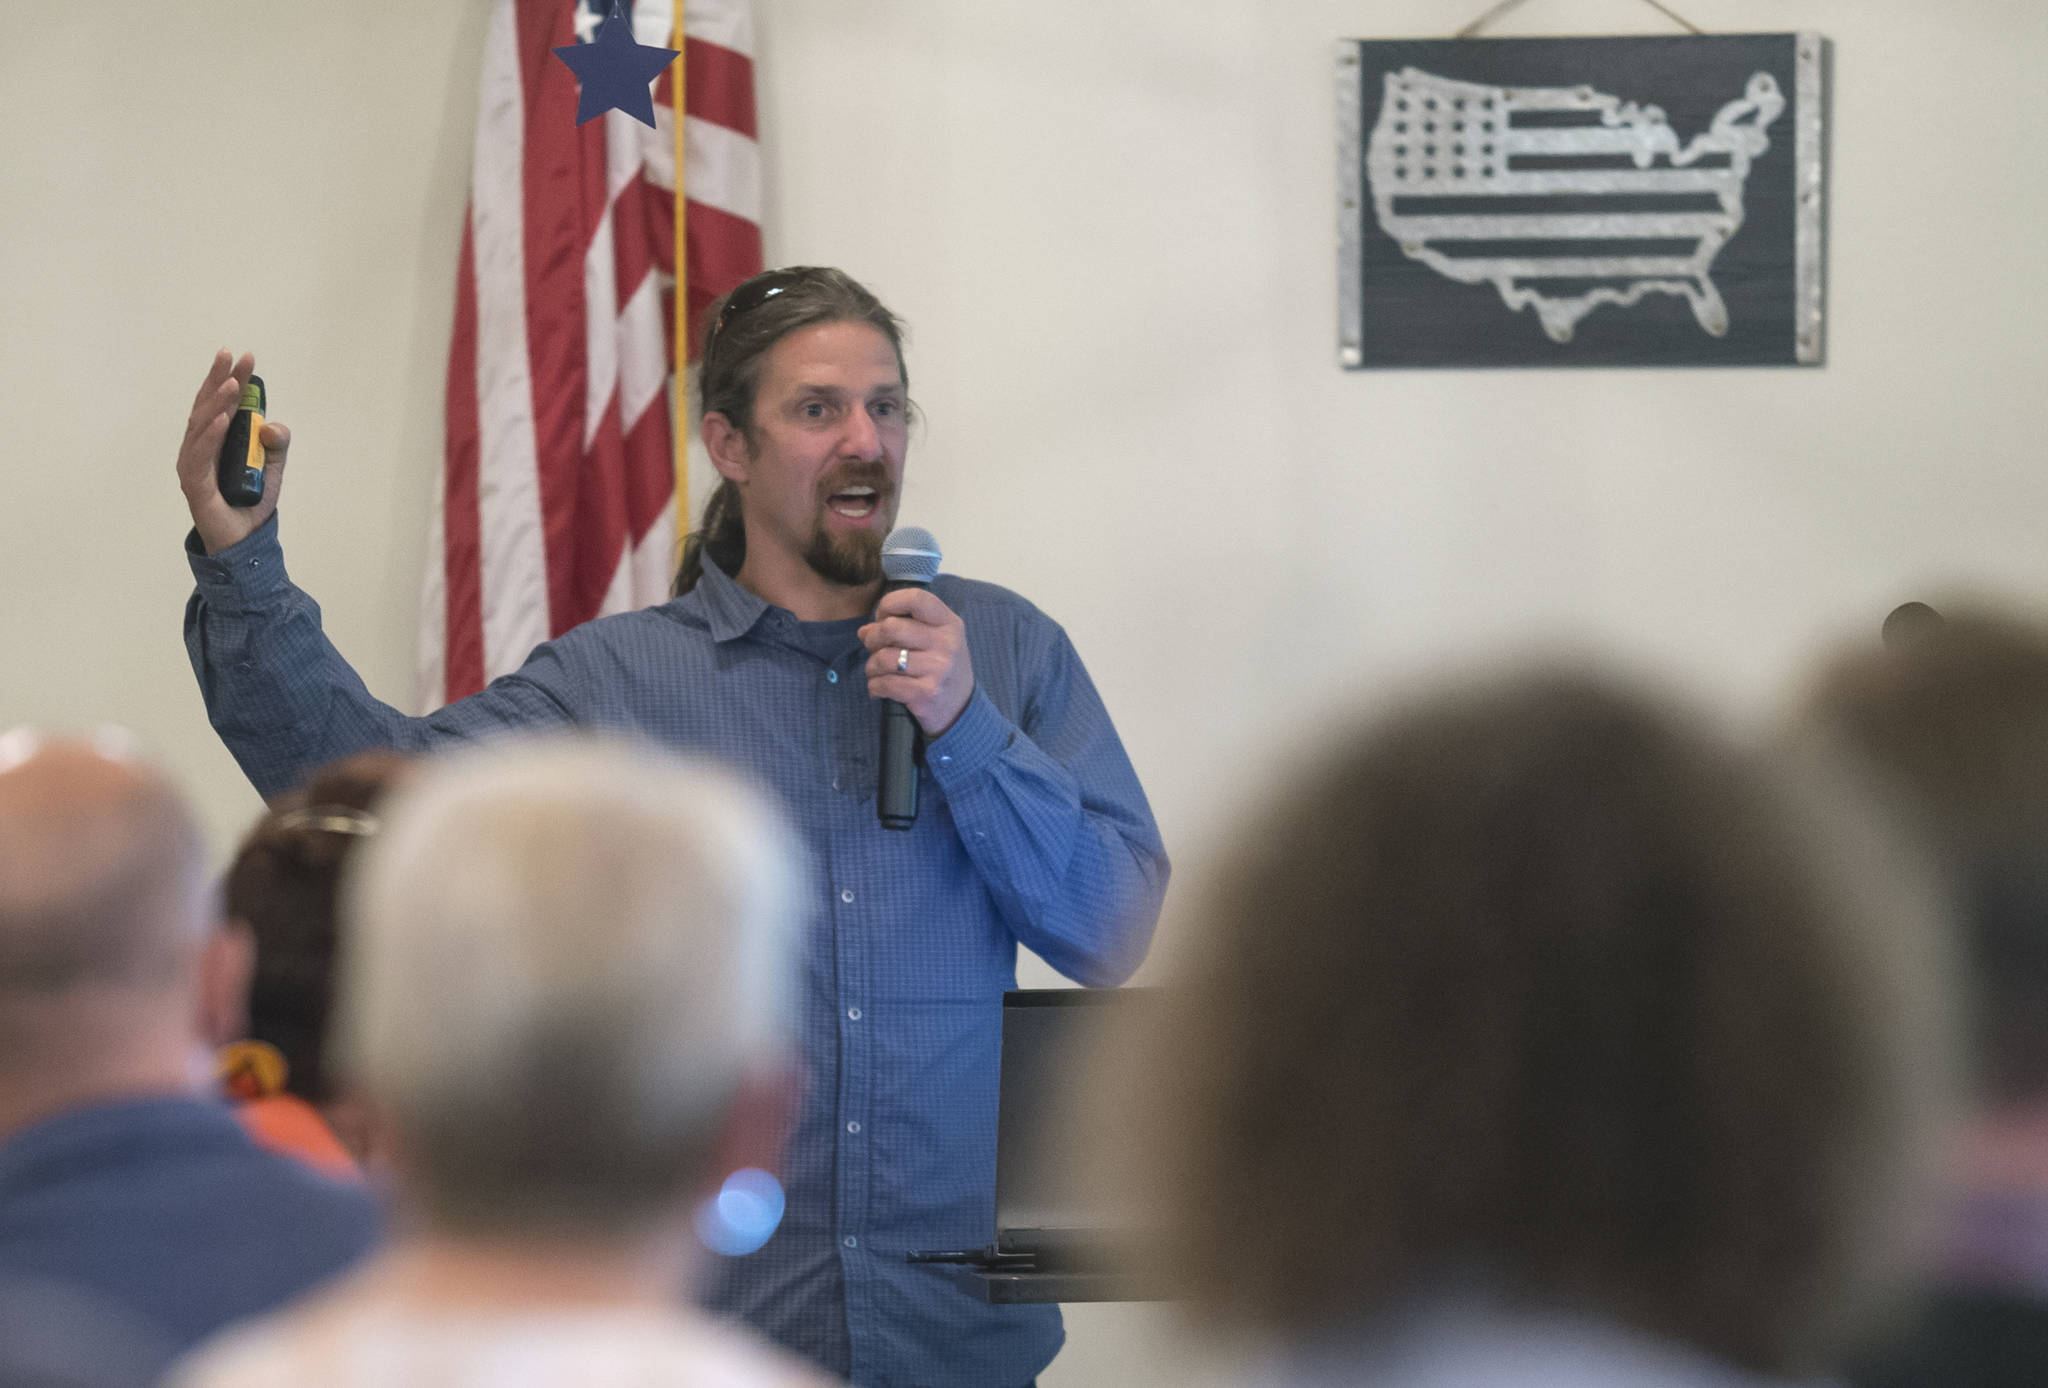 Dave Scanlan, general manager of the Eaglecrest Ski Area, speaks to the Juneau Chamber of Commerce during its weekly luncheon at the Moose Lodge on Thursday, June 28, 2018. (Michael Penn | Juneau Empire)